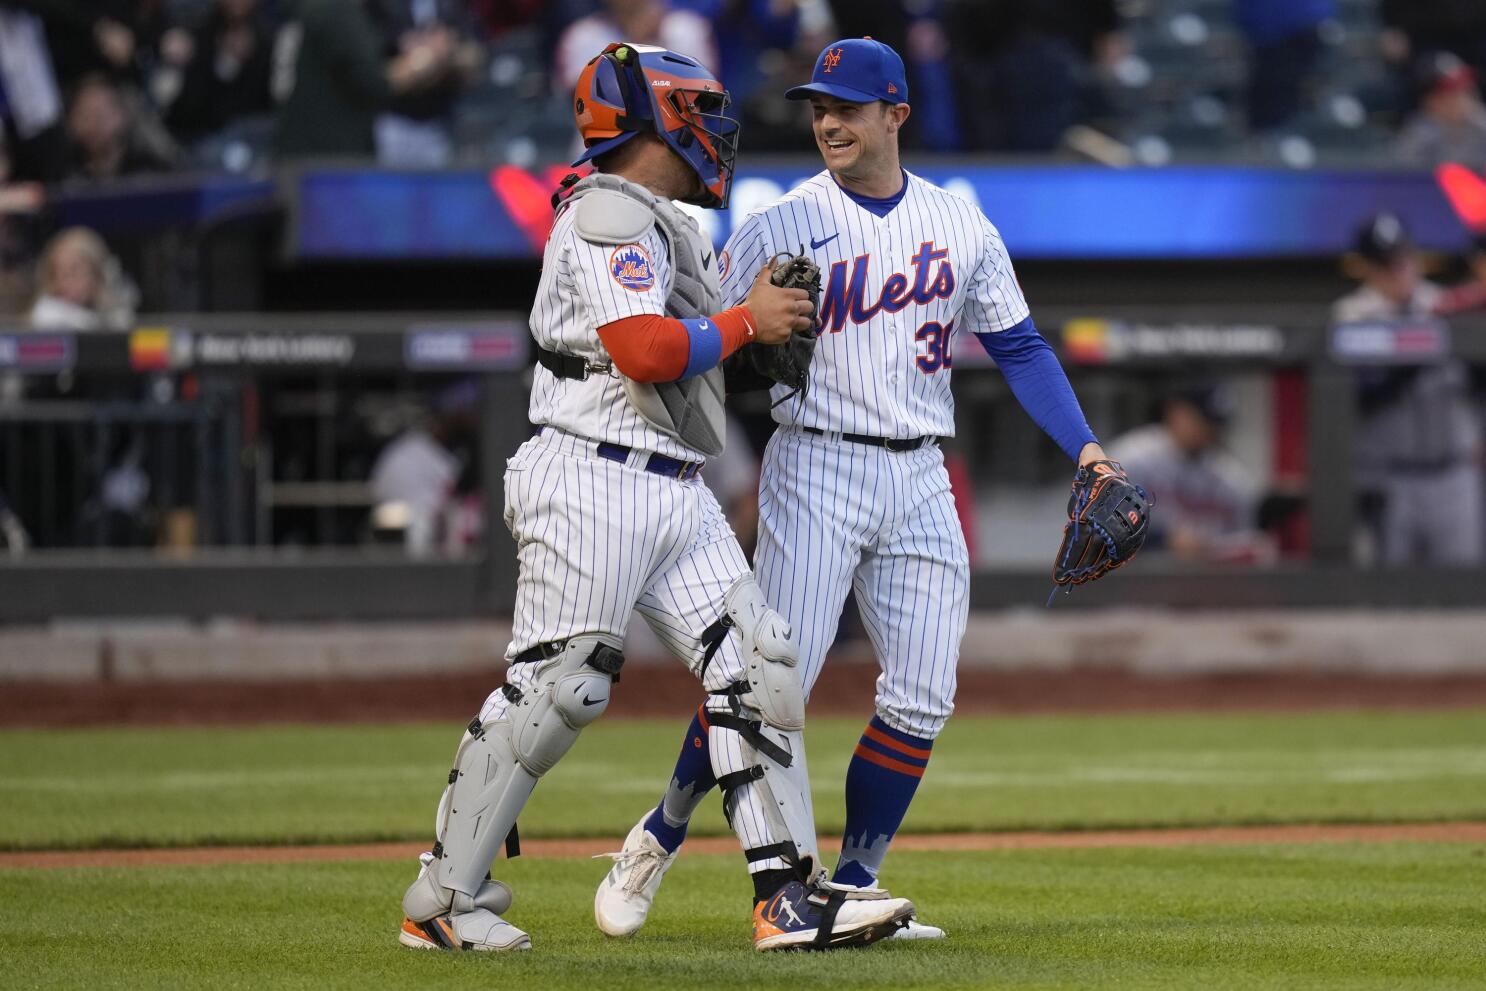 Mets stop Cubs, take 2-0 NLCS lead - The Boston Globe